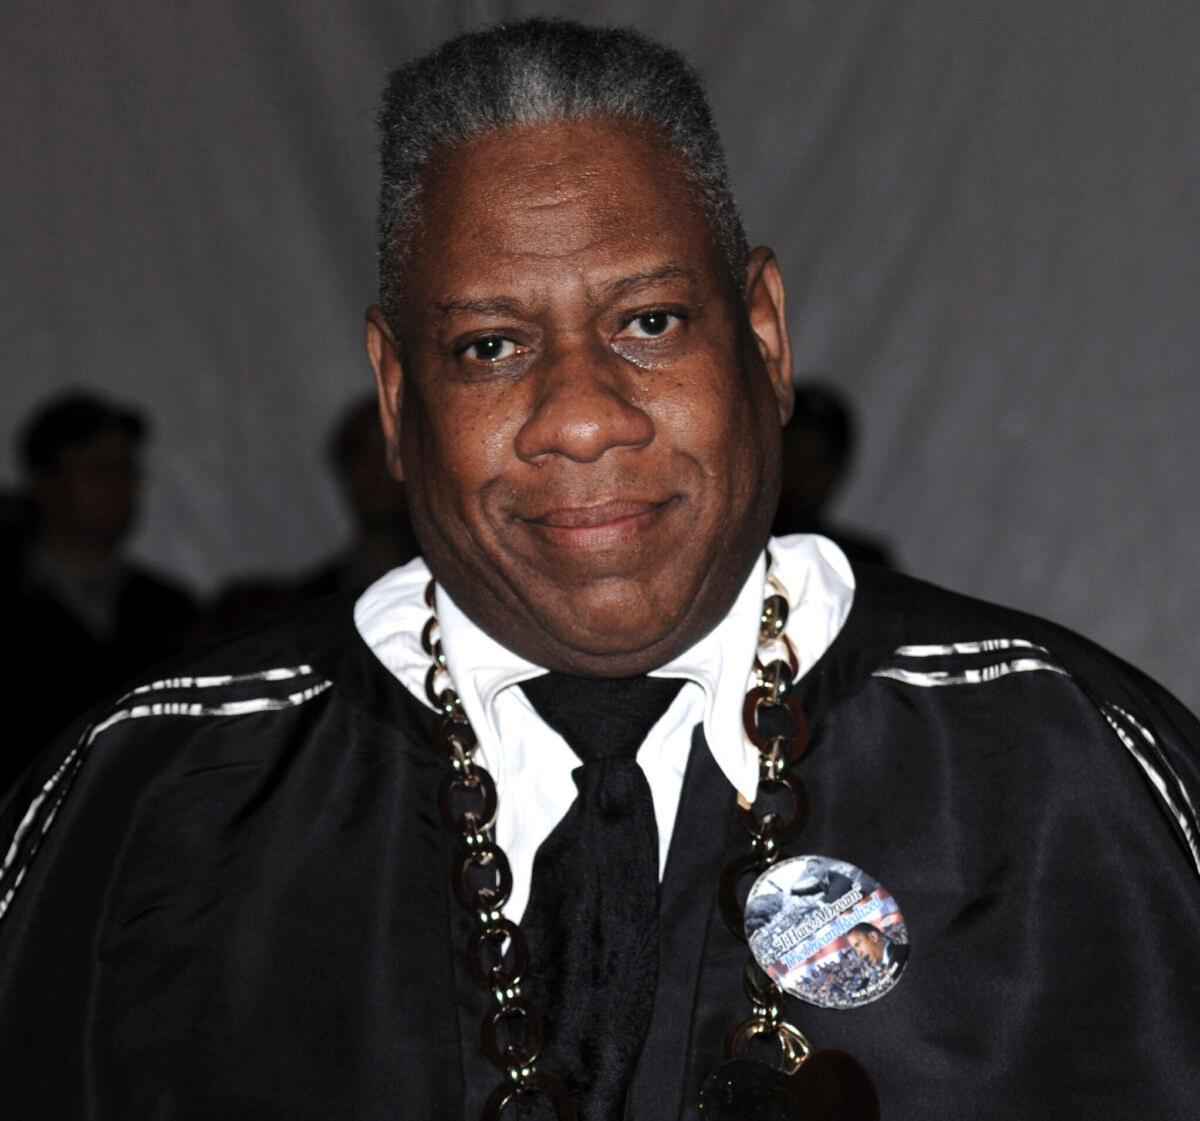 Vogue editor at large André Leon Talley arrives at the Metropolitan Museum of Art's Costume Institute Gala in New York, on May 4, 2009. (Evan Agostini/AP Photo)